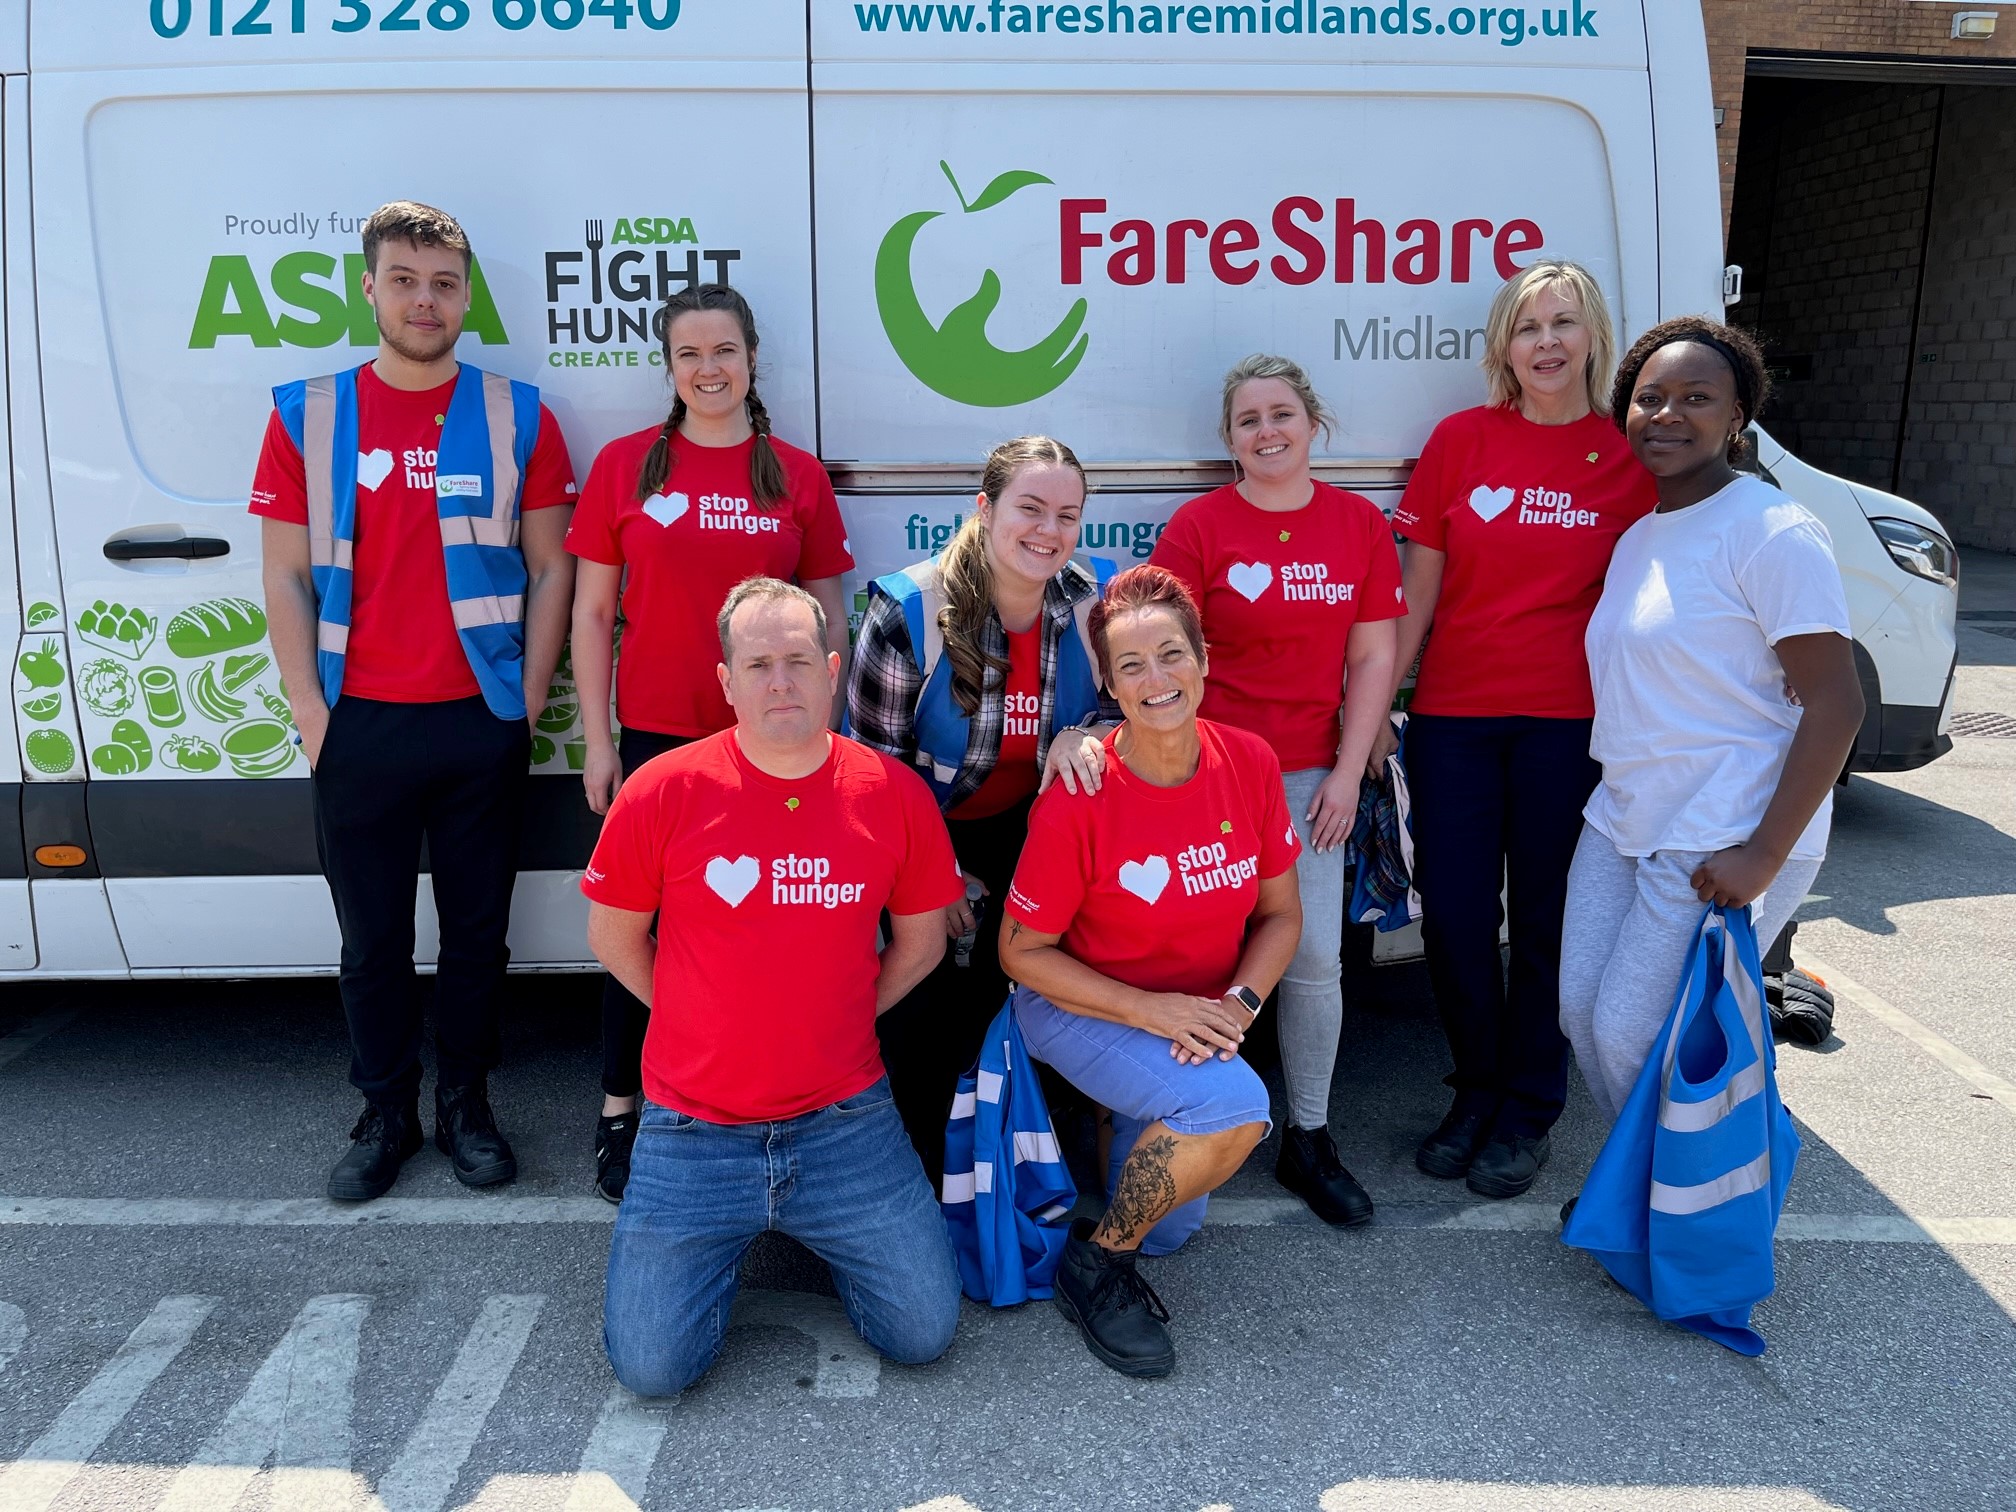 stop hunger volunteering with FareShare